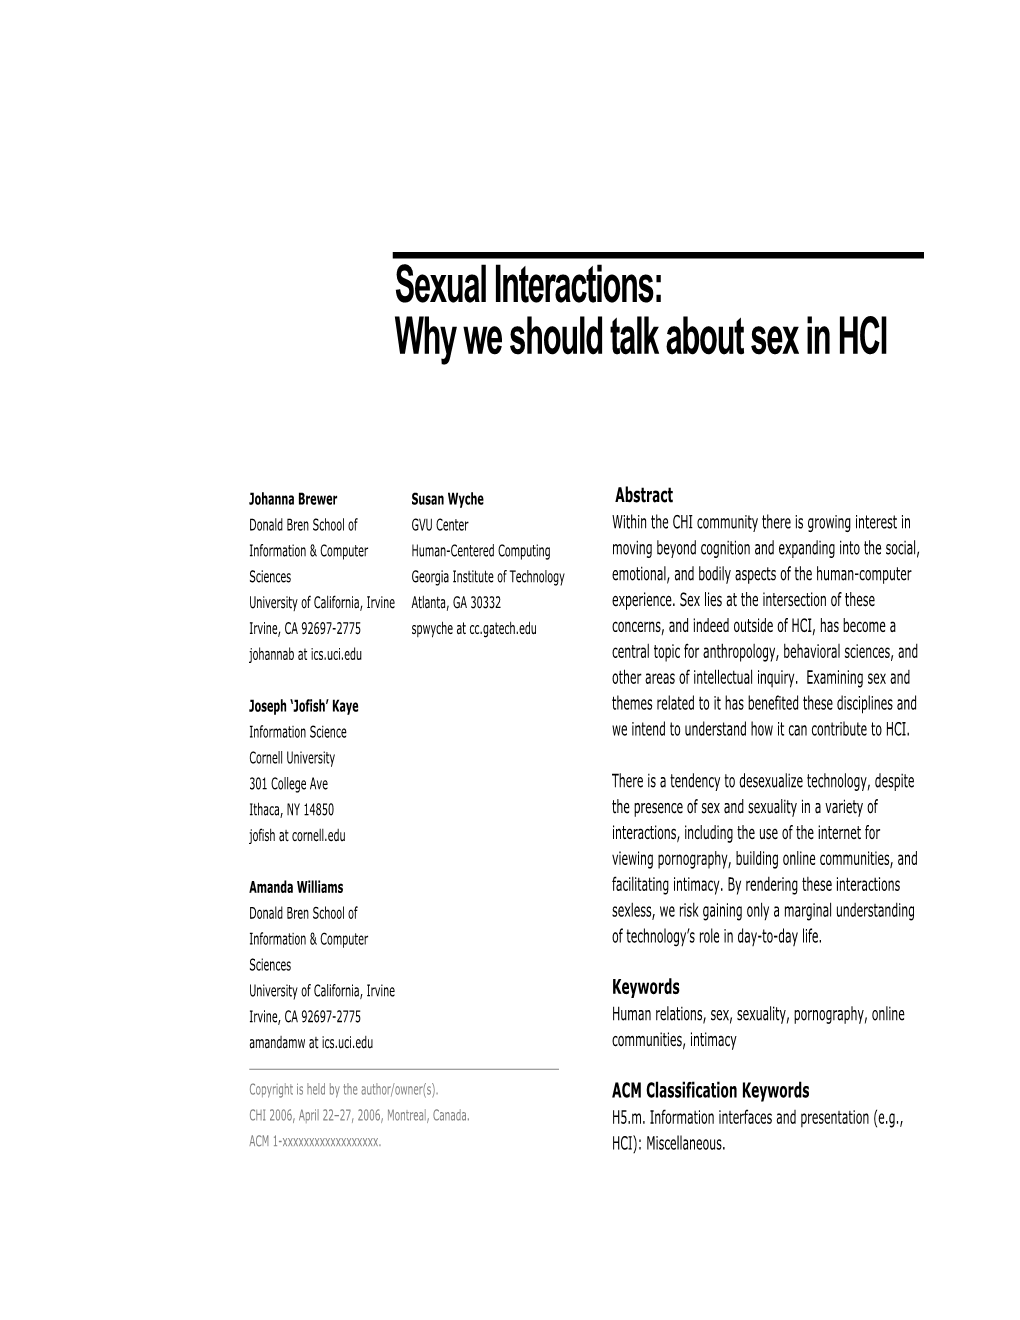 Sexual Interactions: Why We Should Talk About Sex in HCI